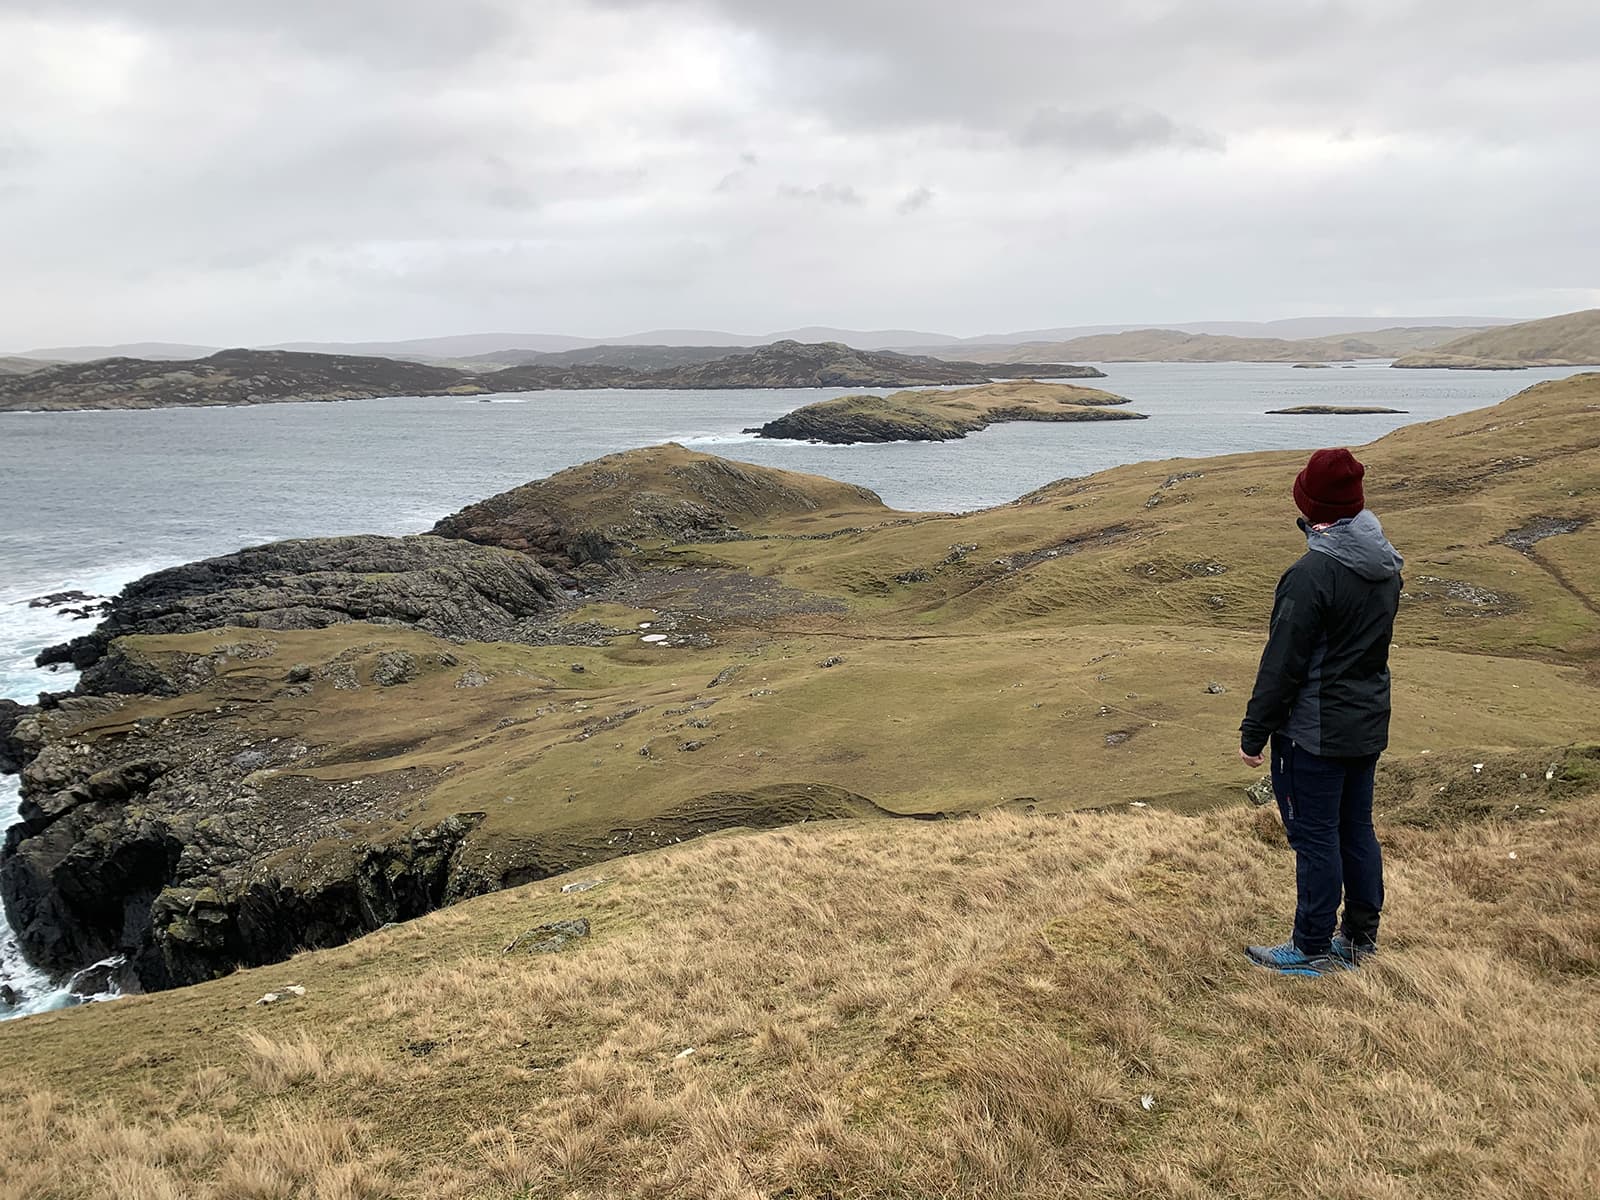 A photo of a man wearing a burgundy winter hat at the top of a hill overlooking the sea and the islands in the distance.